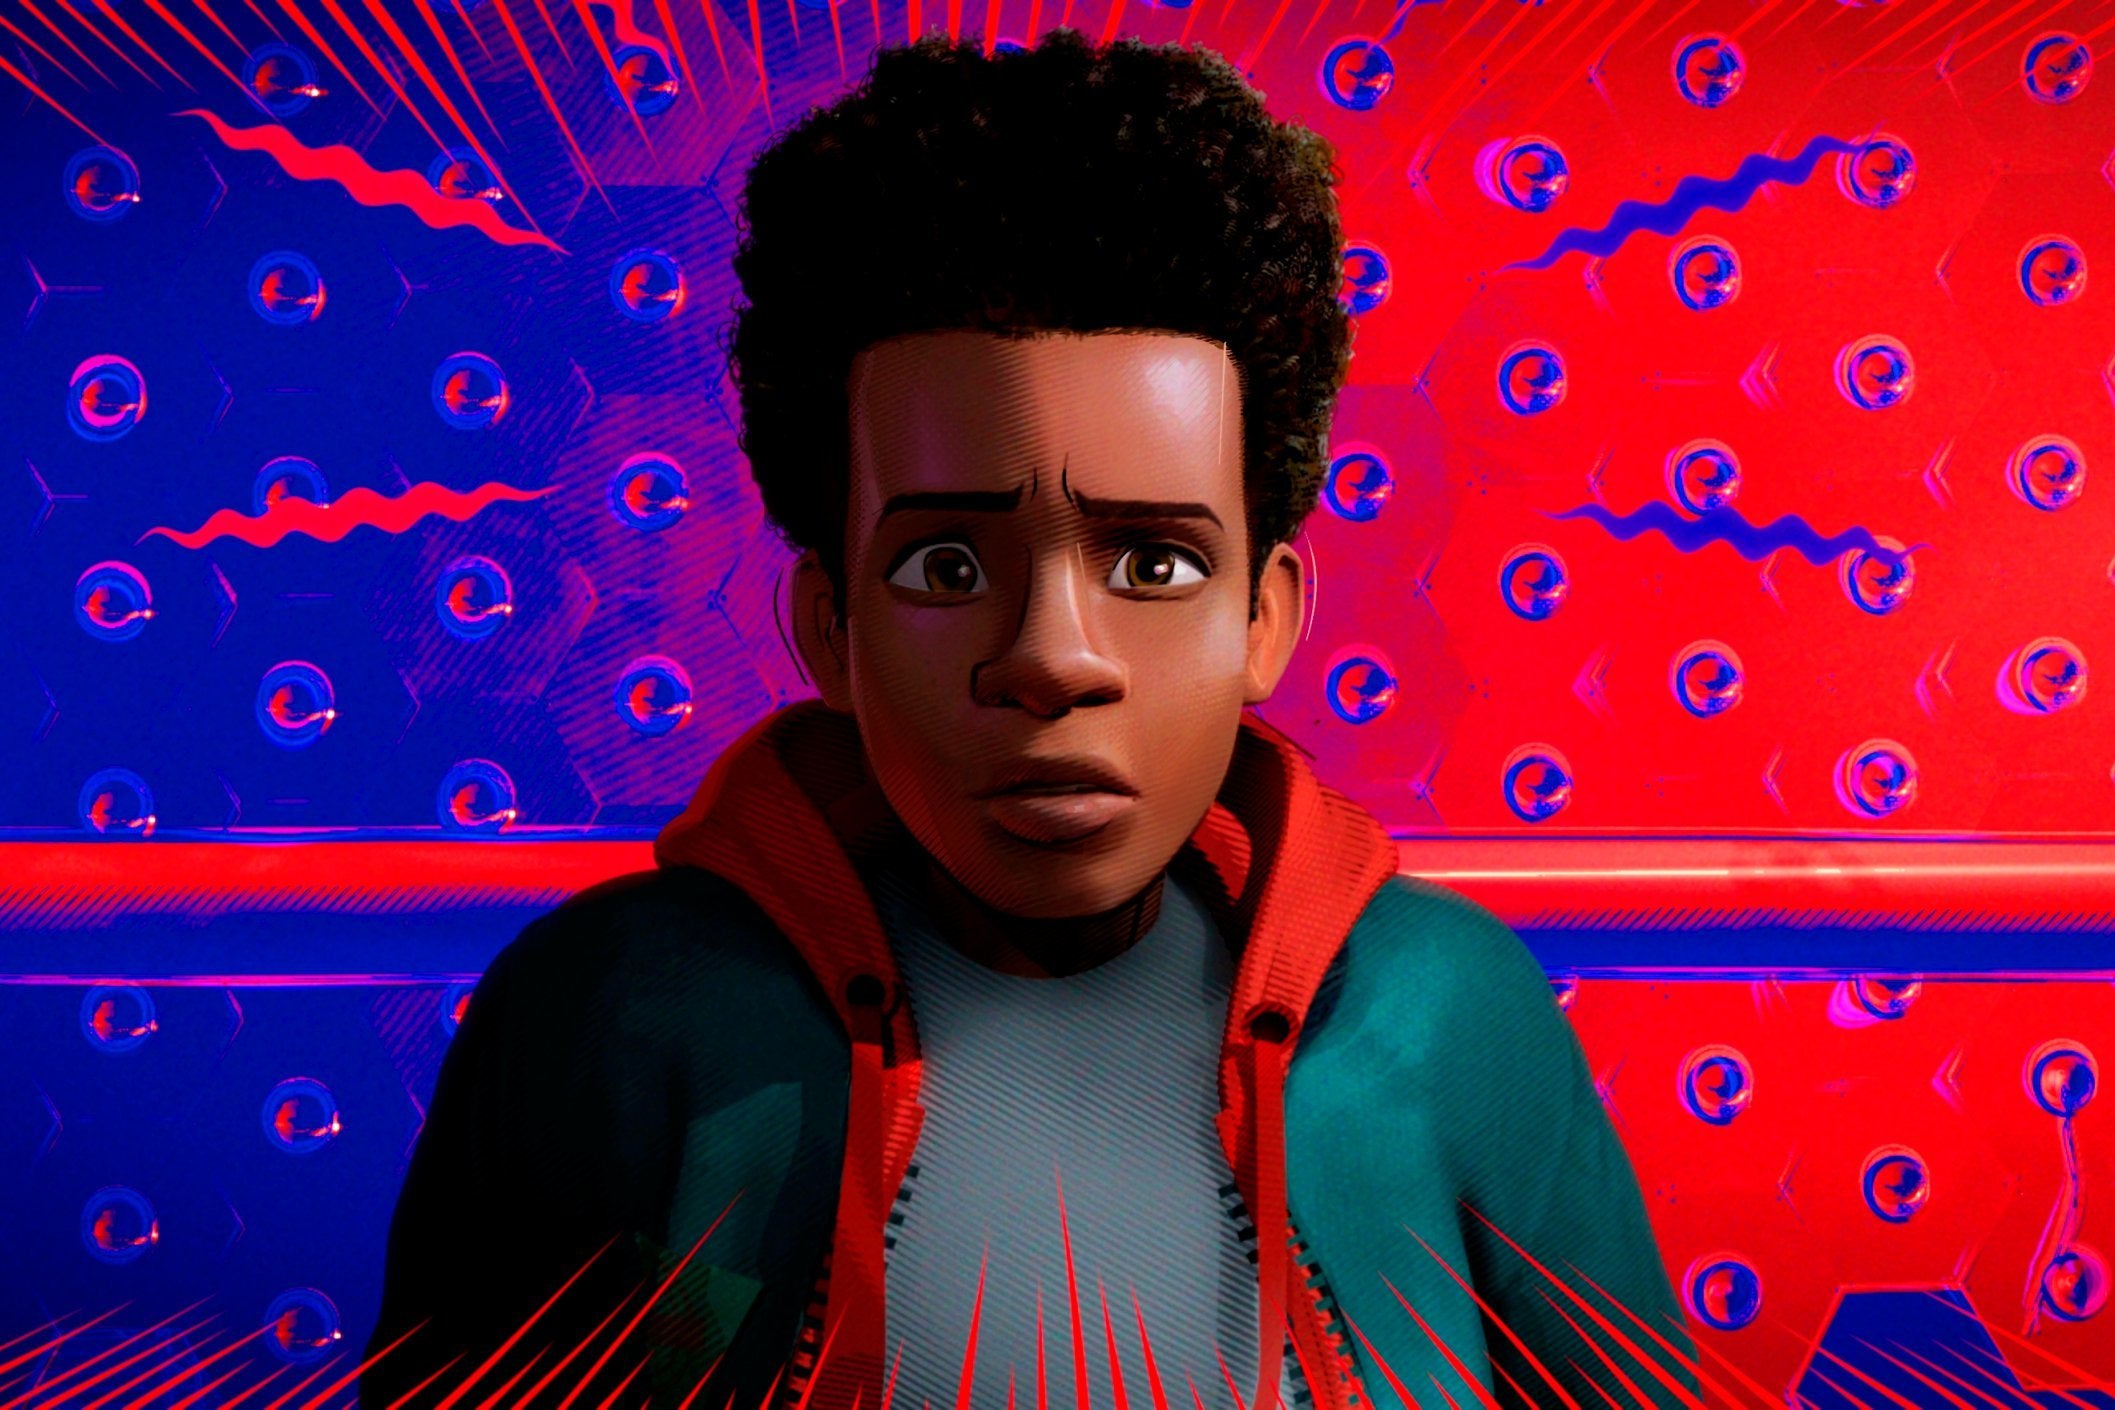 Miles Morales, voiced by Shameik Moore, in a scene from ‘Spider-Man: Into the Spider-Verse’